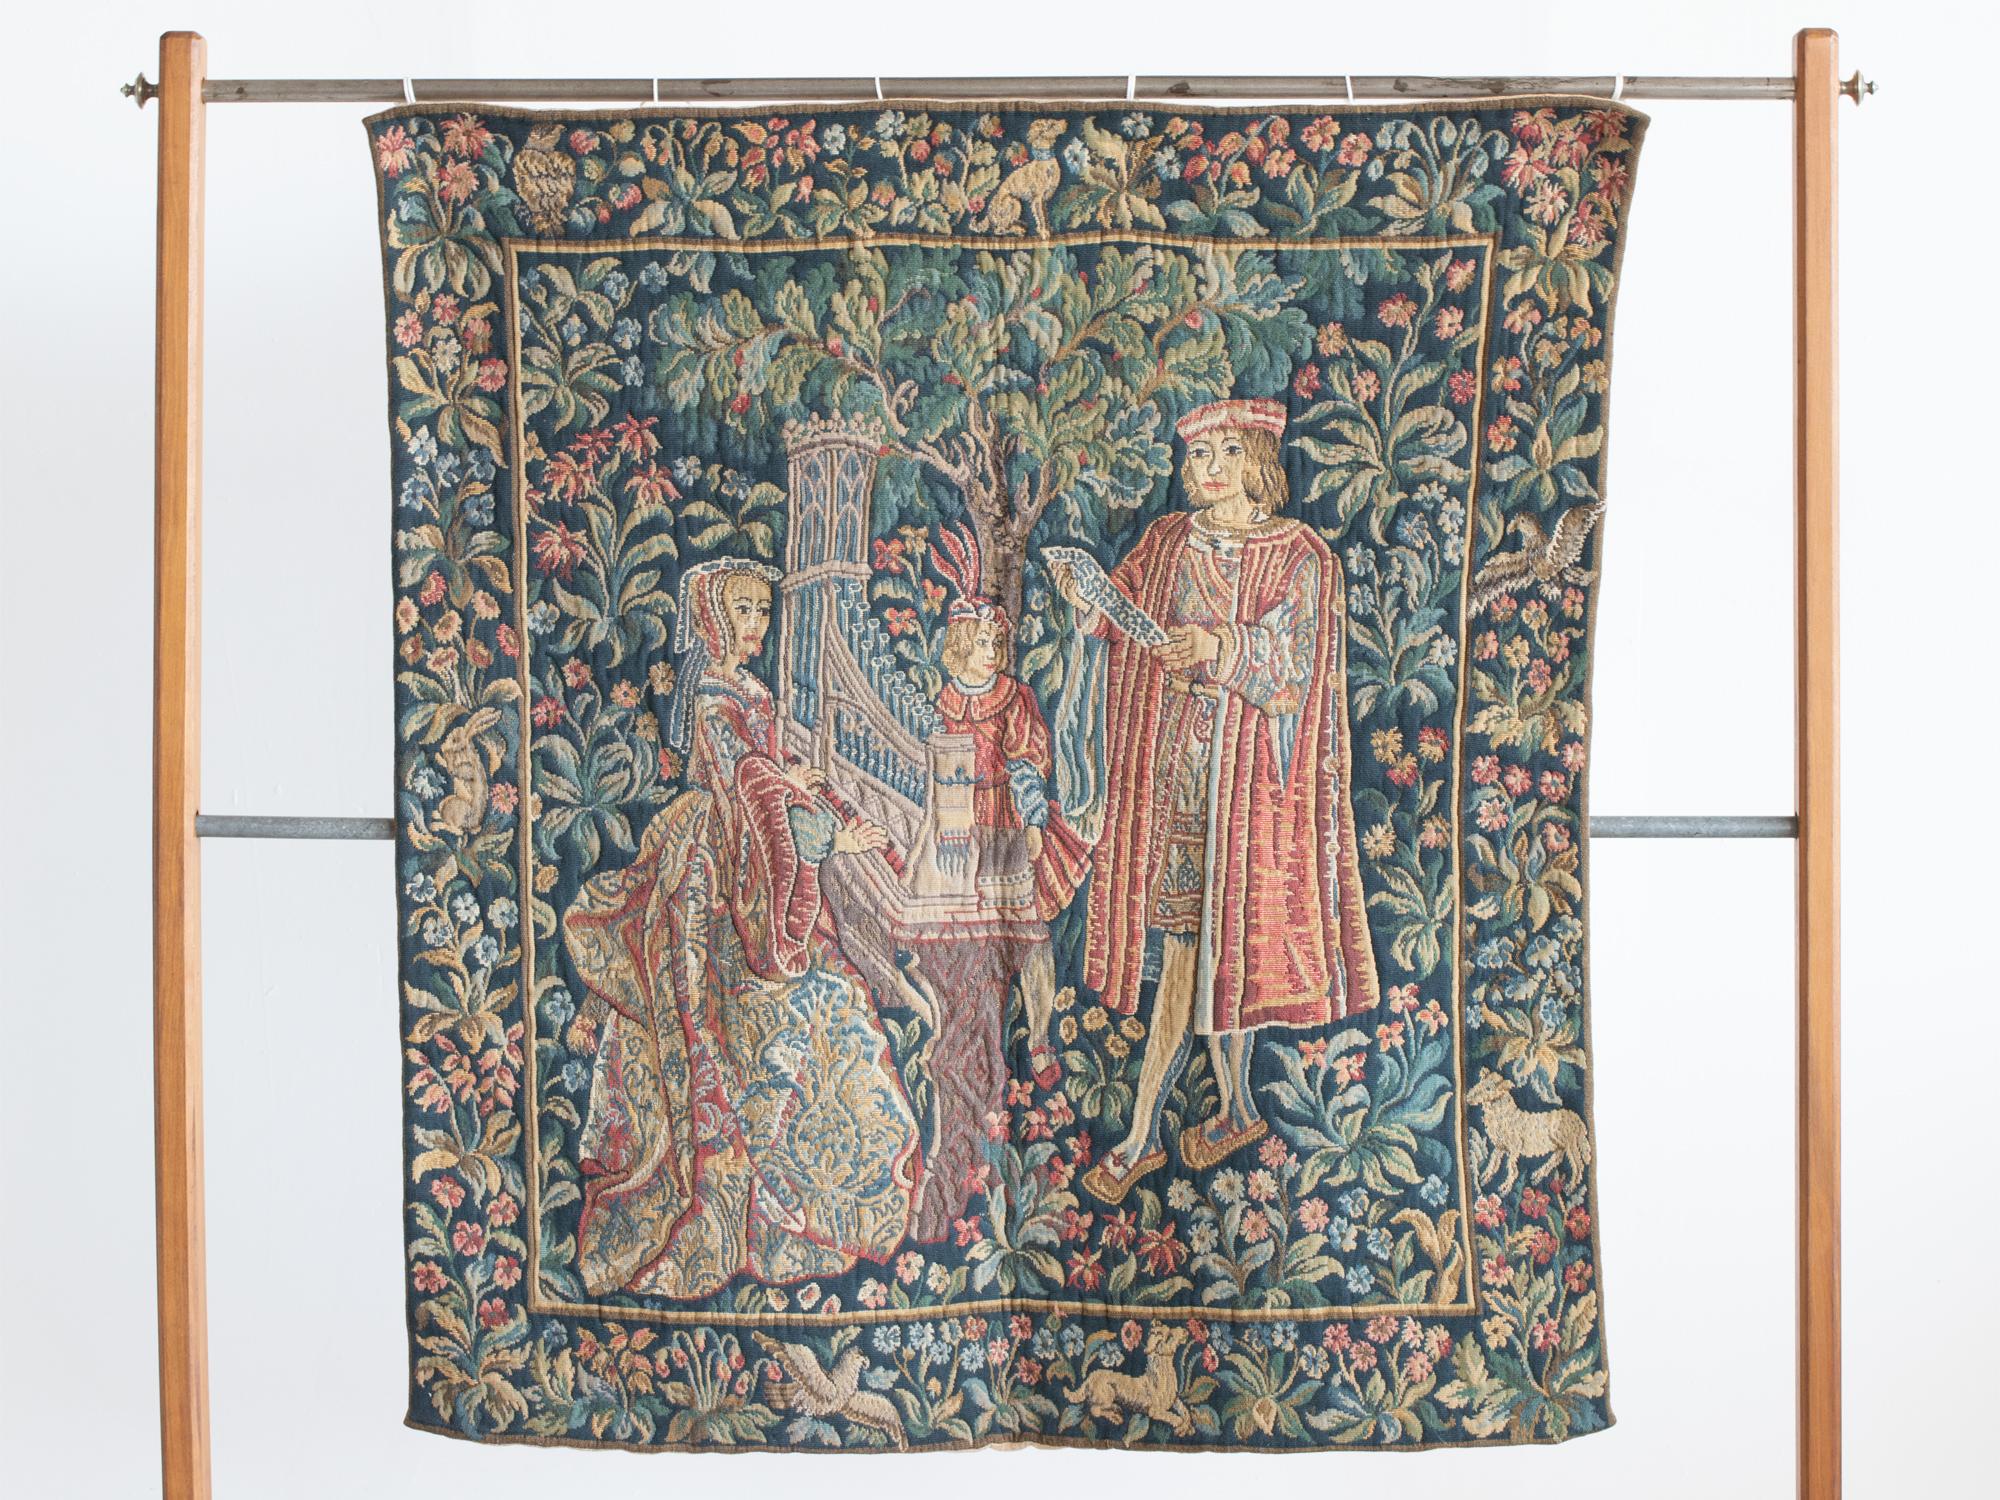 A tapestry wall hanging in the medieval taste. French, mid 20C.

Inspired by the work “La Dame à L'orgue”, part of the The Lady and Unicorn series, done in the Mille fleurs style in the late 15th century, today at the Angers castle.

In good order